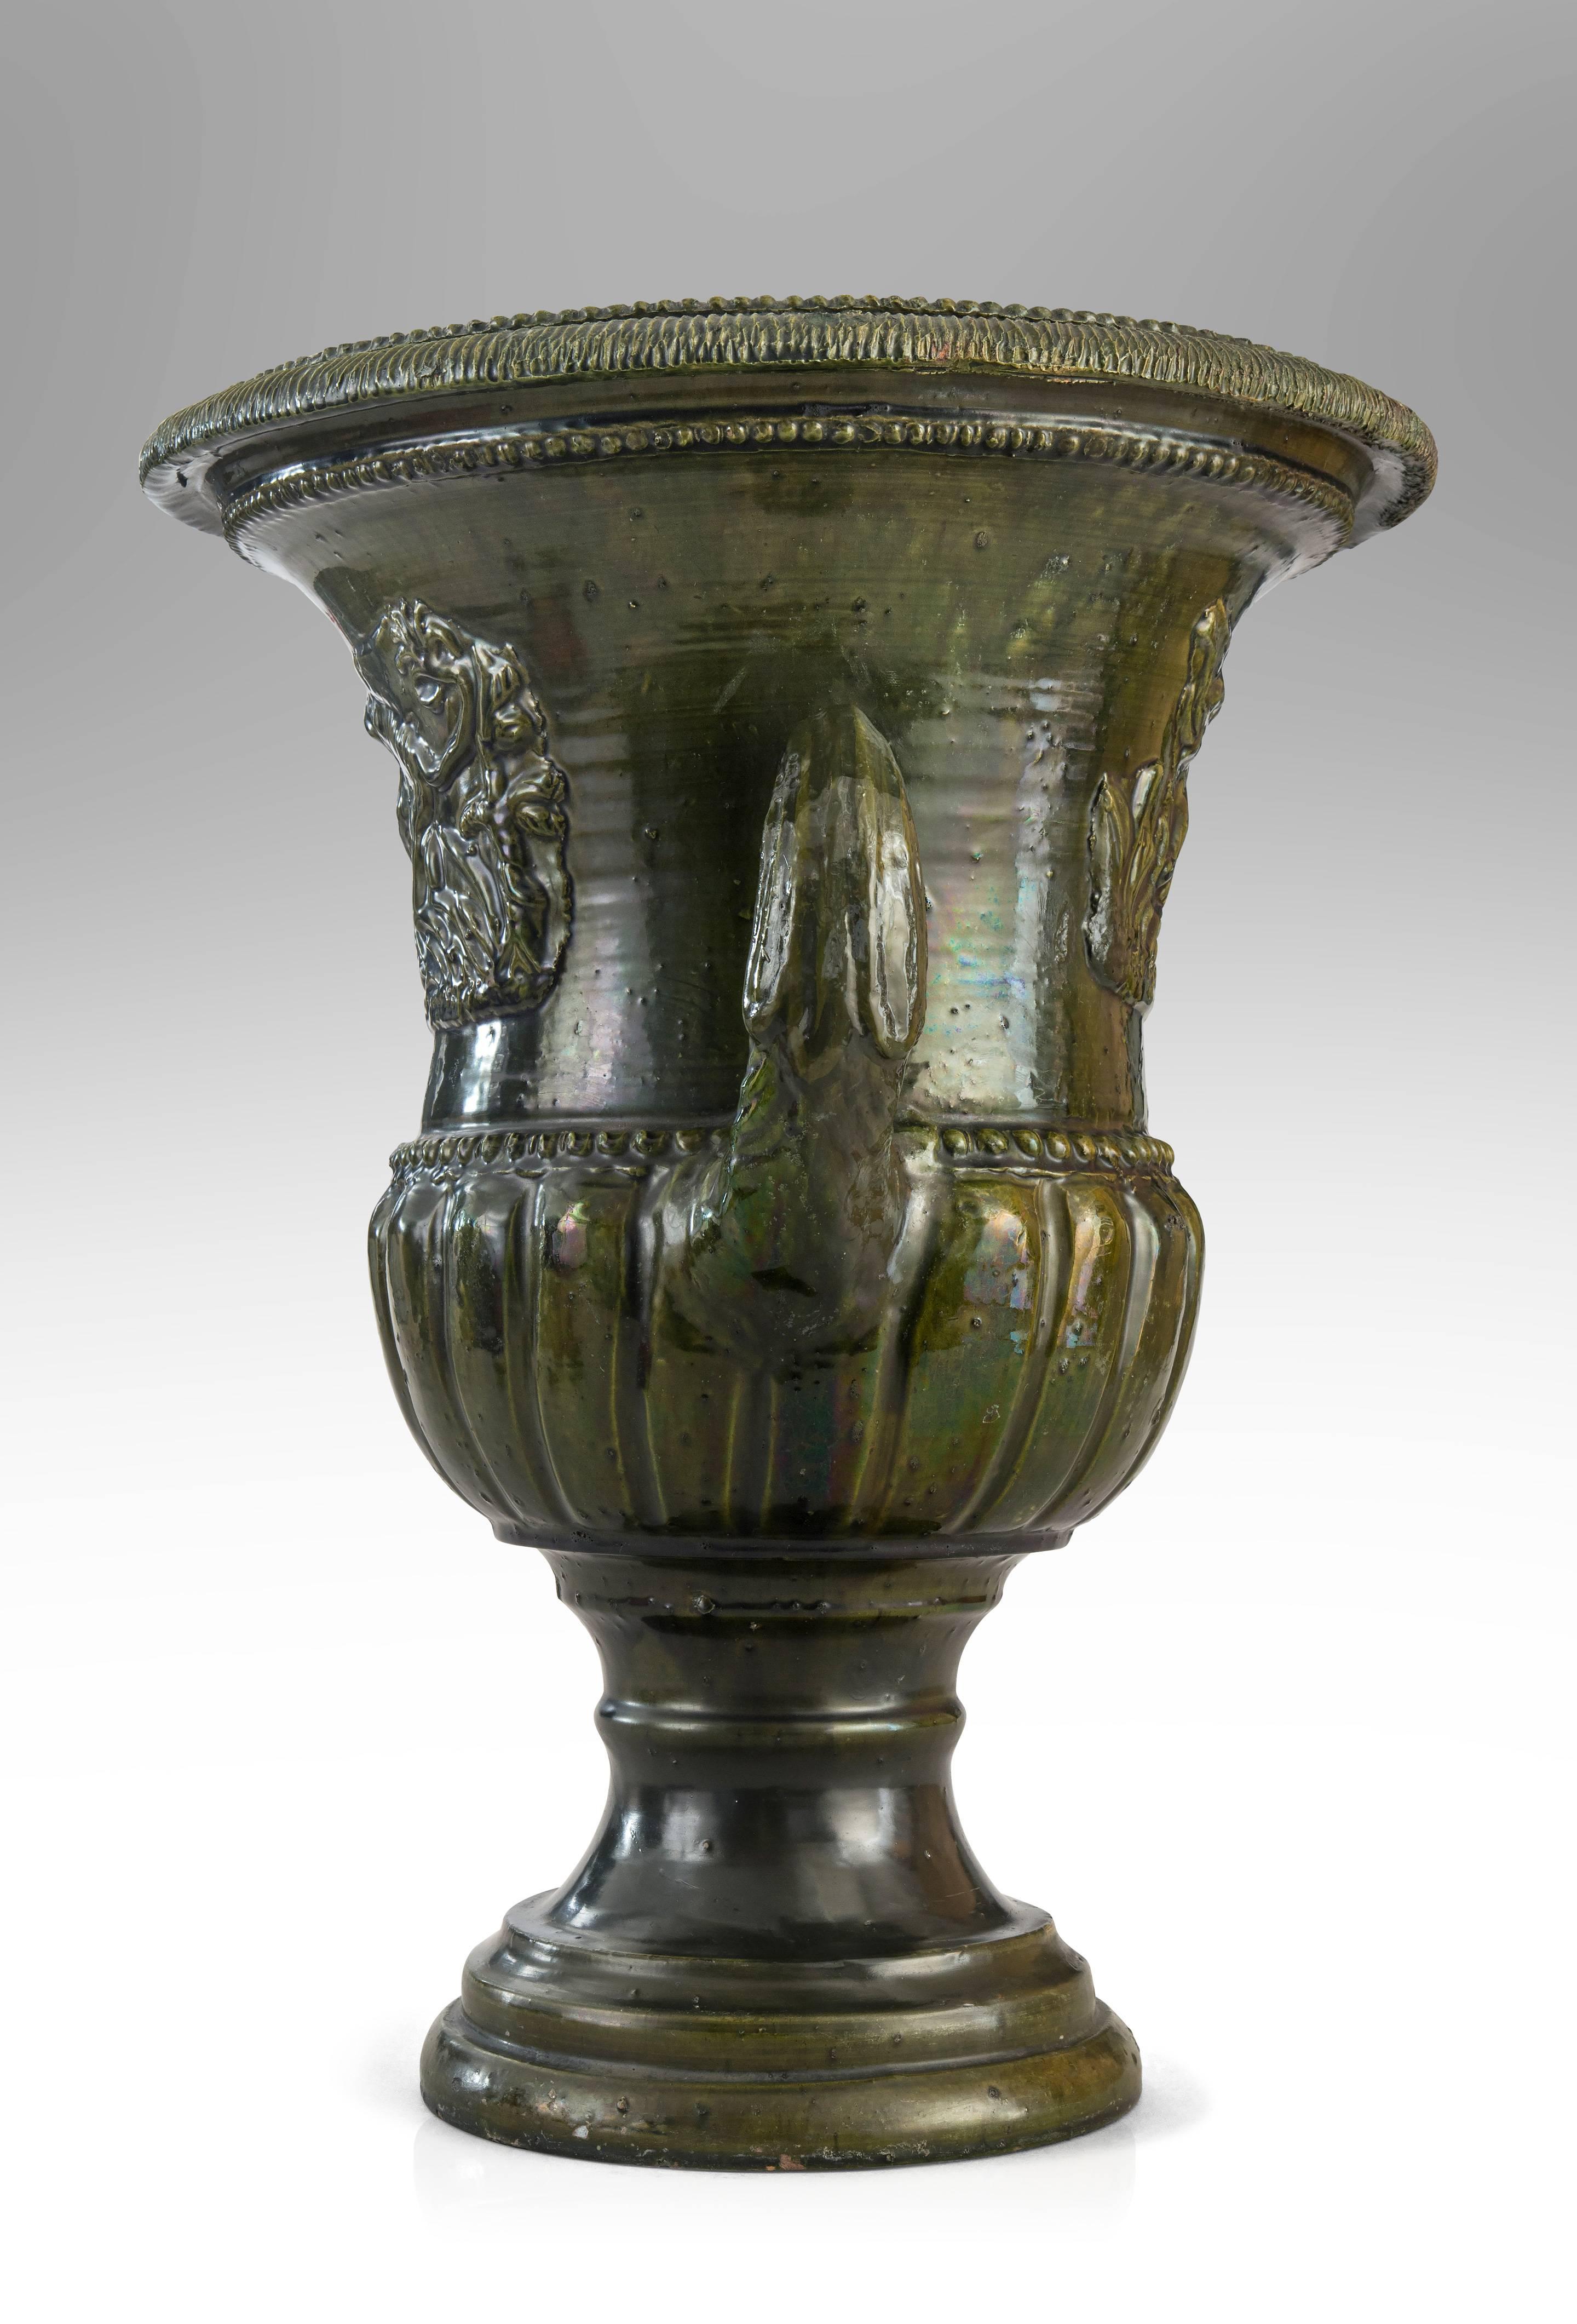 Beautiful modeling and richly glazed with a complex antique green. A French Green Glazed Faience Campana Urn with Classical Relief 

 Very good antique condition, ready to add to your collection.